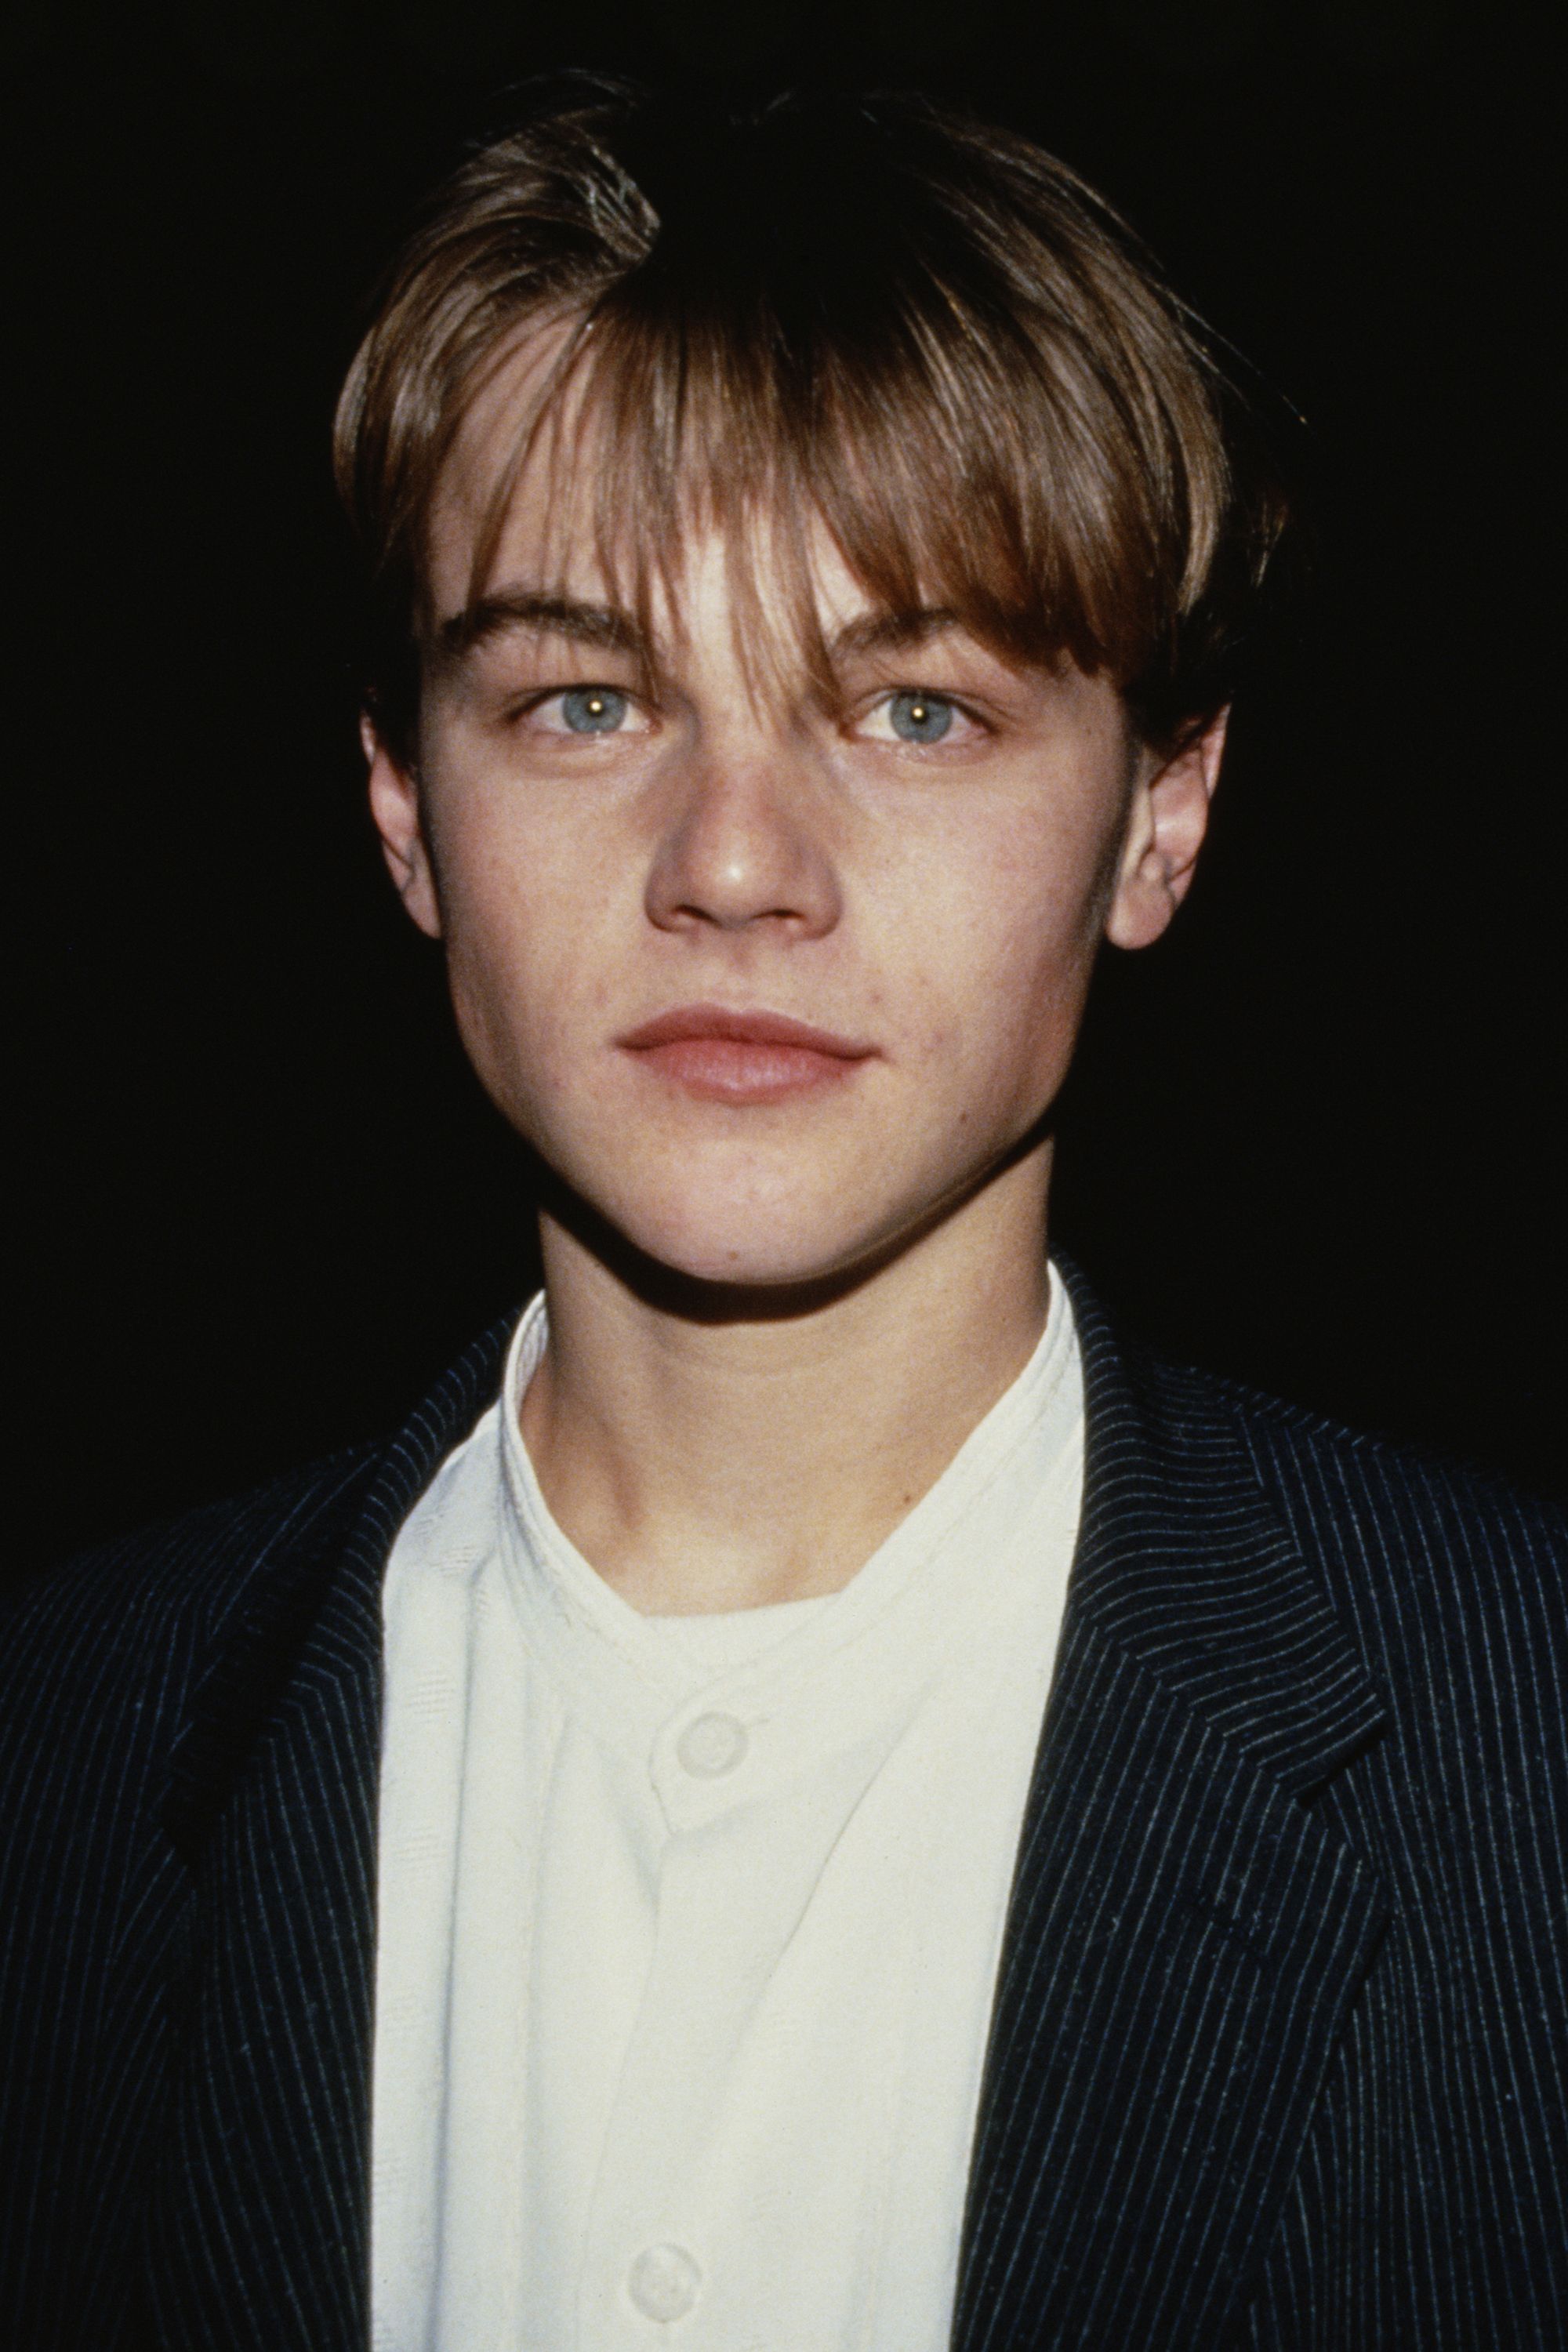 Cinema Romantico: Leonardo DiCaprio May or May Not Have Been Famous Before  Titanic but He Was Definitely a Movie Star